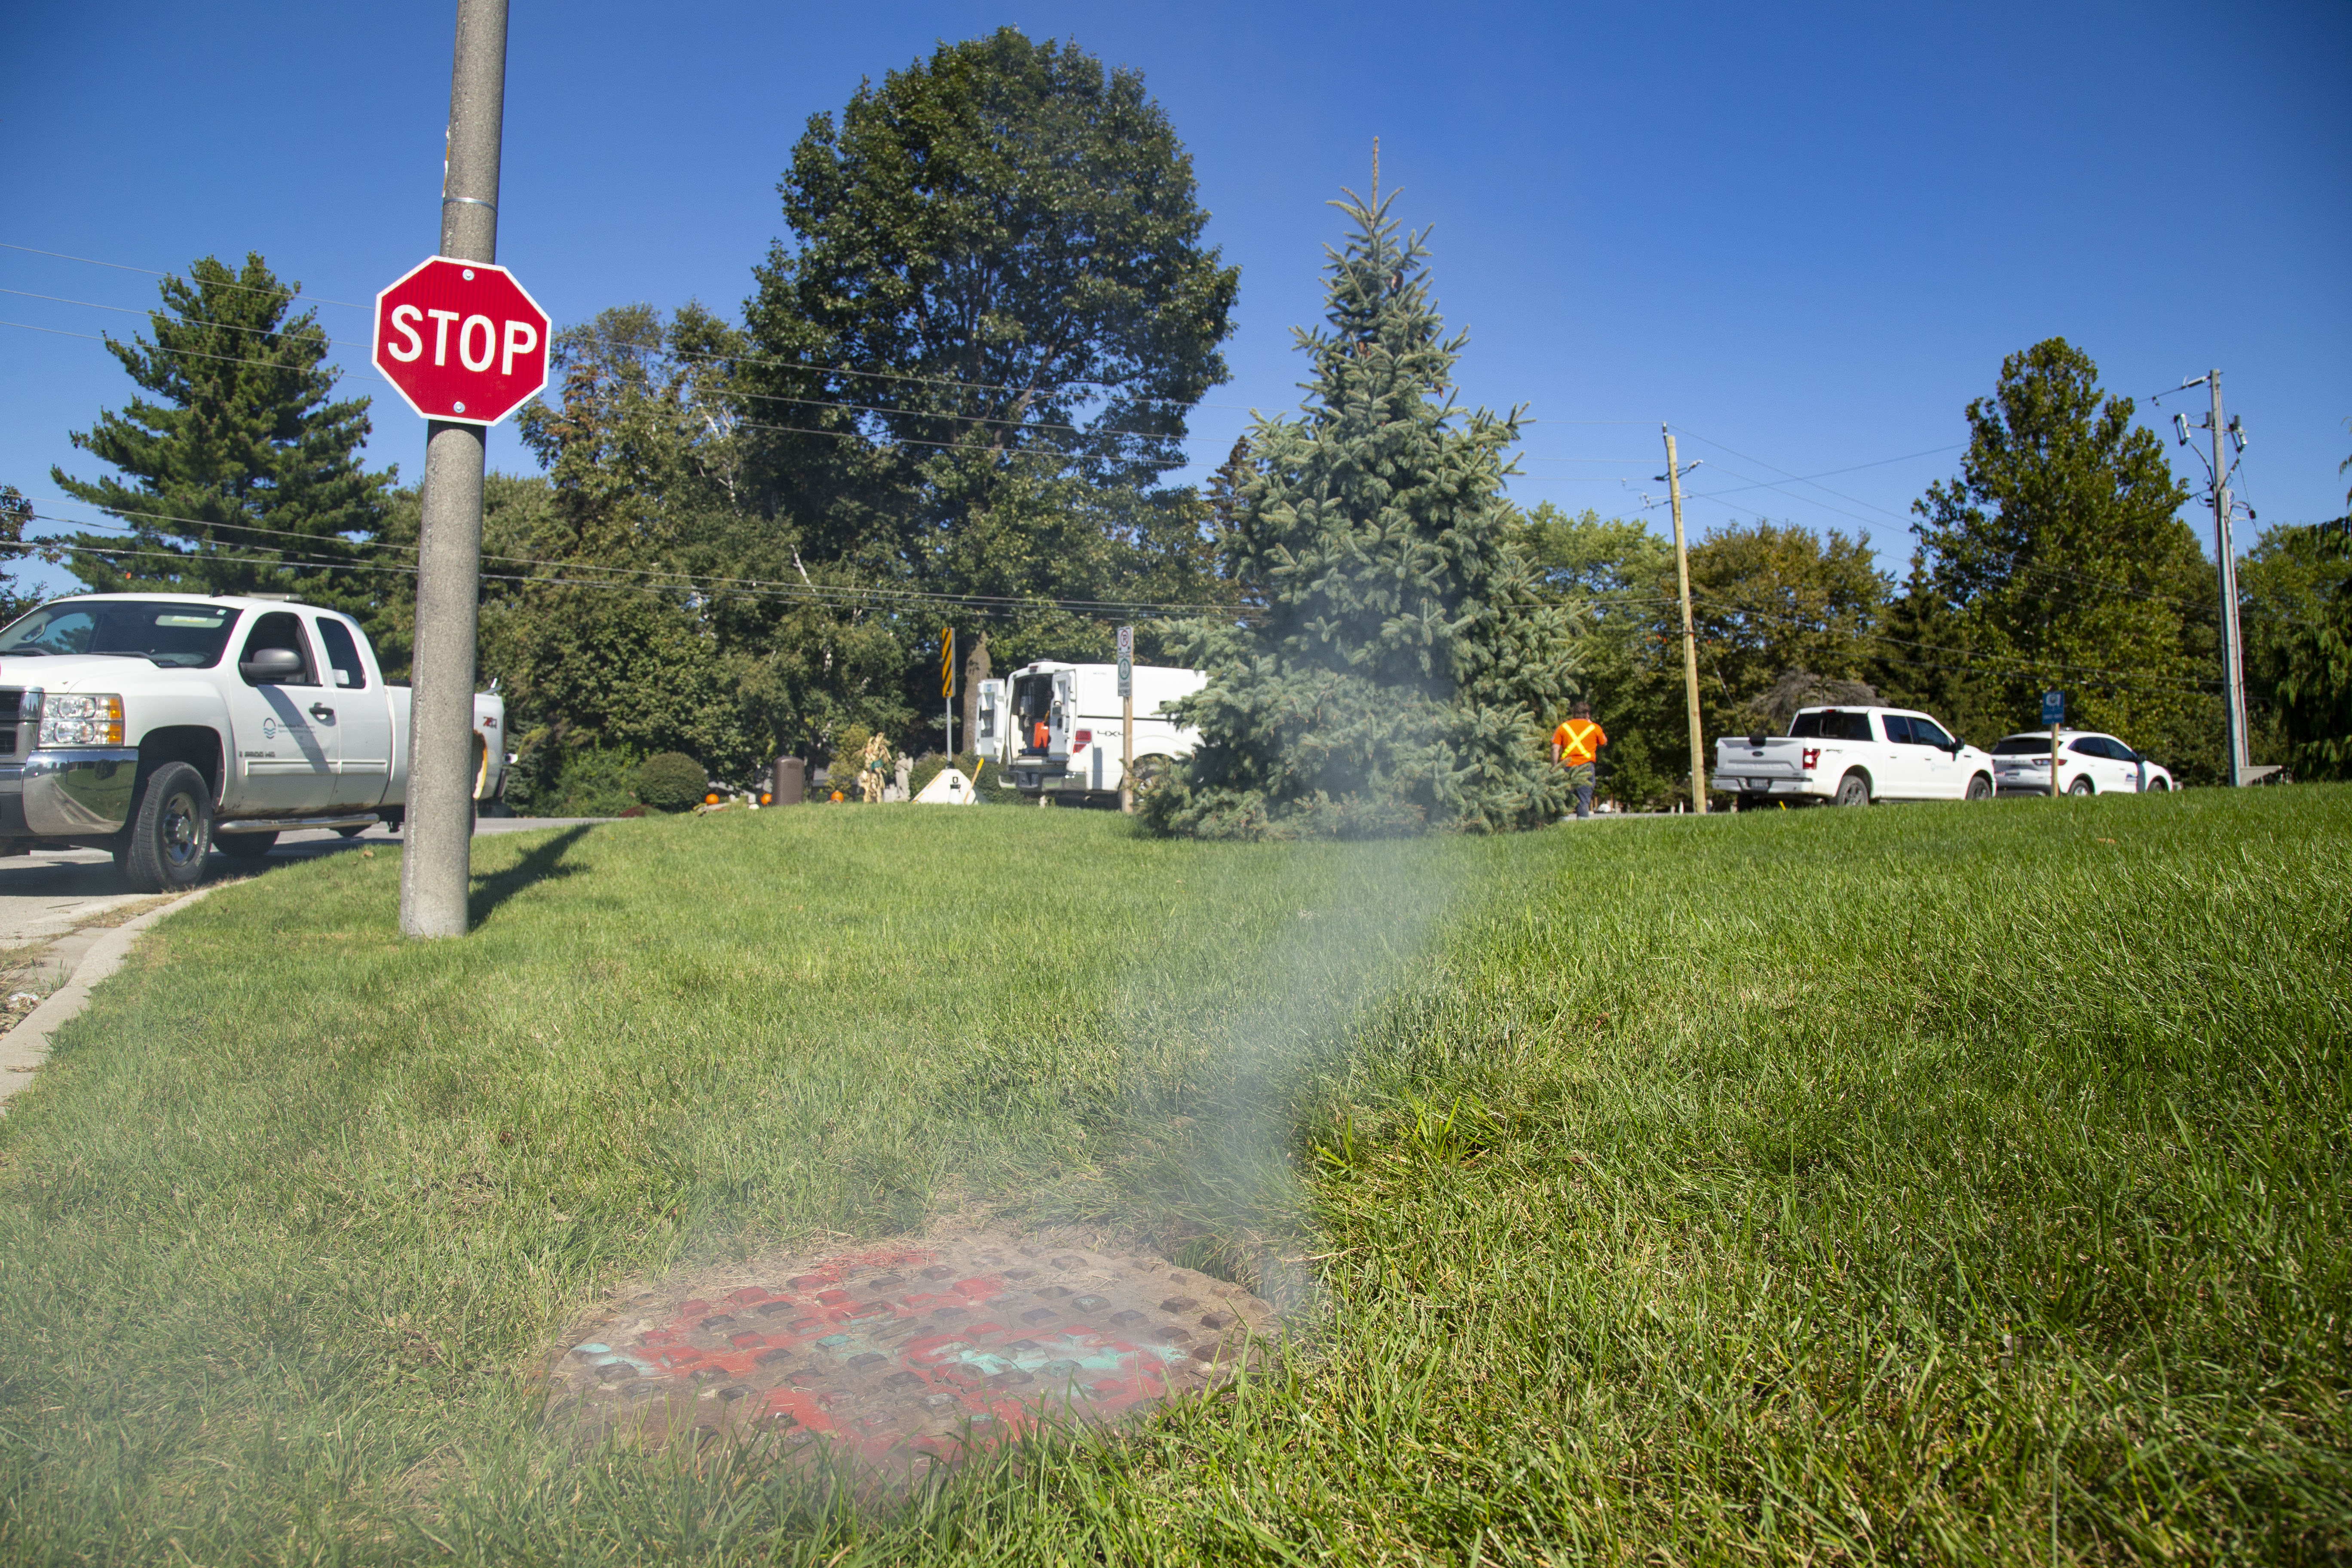 Sewer manhole with white vapour coming out of the holes. The manhole is on a grass lawn of a corner lot. Stop sign at the top left of image and work trucks in the background.